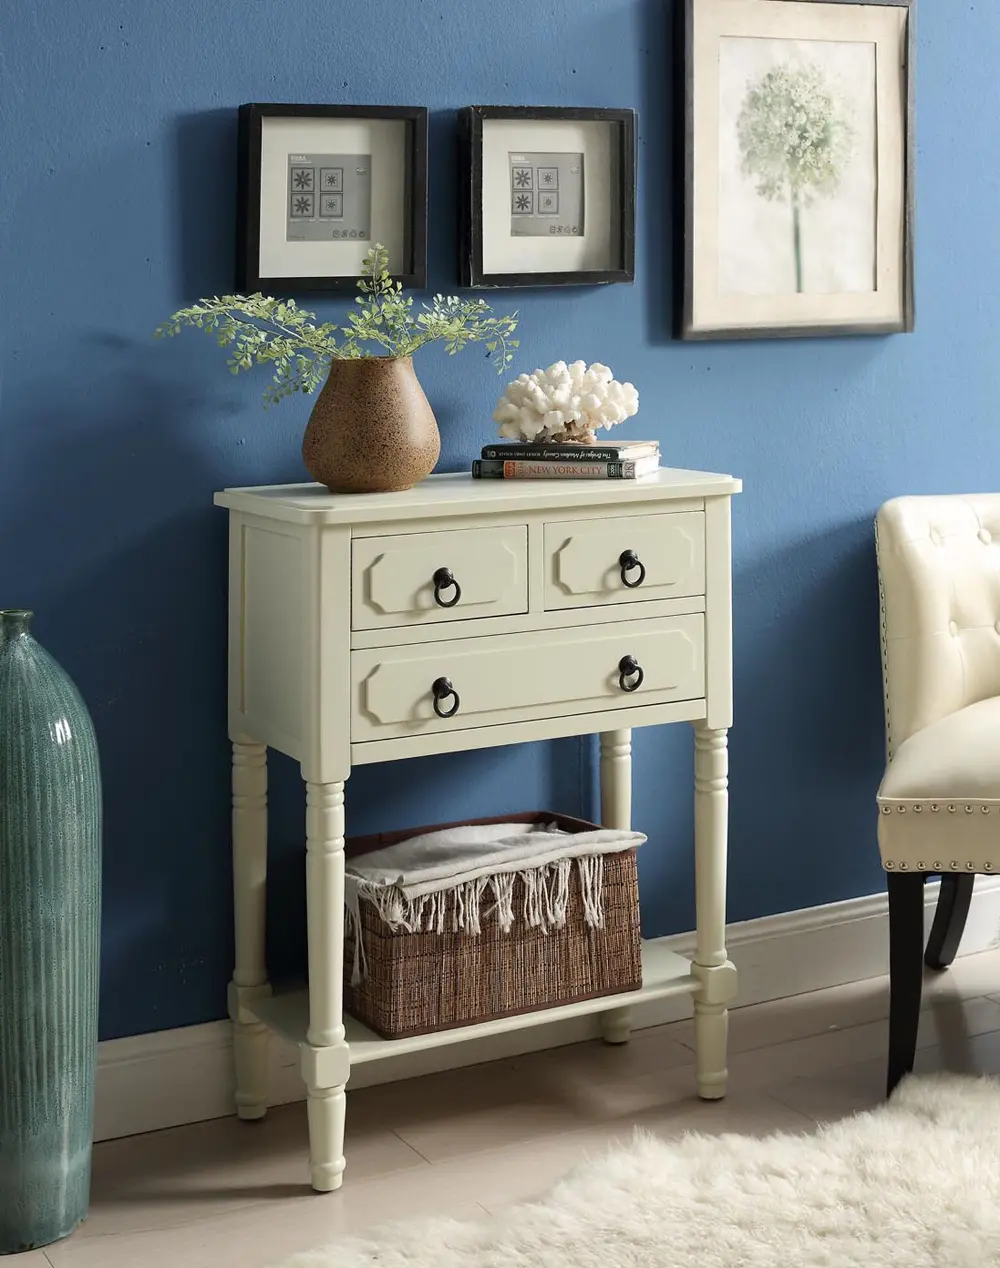 Buttermilk White 3 Drawer Living Room Chest - Simplicity-1